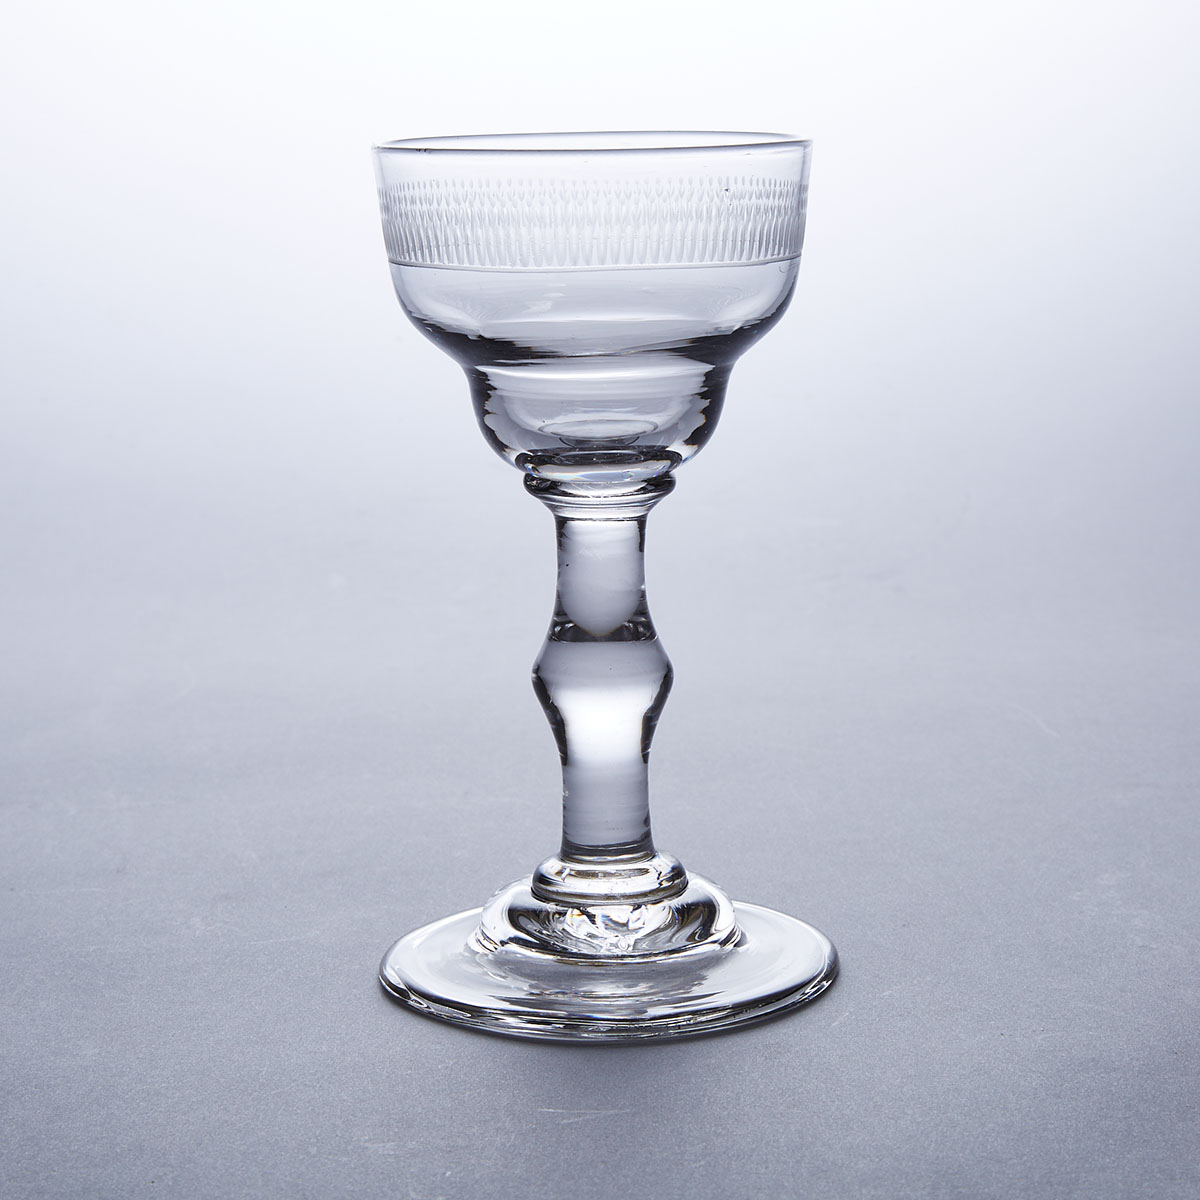 English Engraved Balustroid Knopped Stemmed Glass Sweetmeat Goblet, c.1760-90